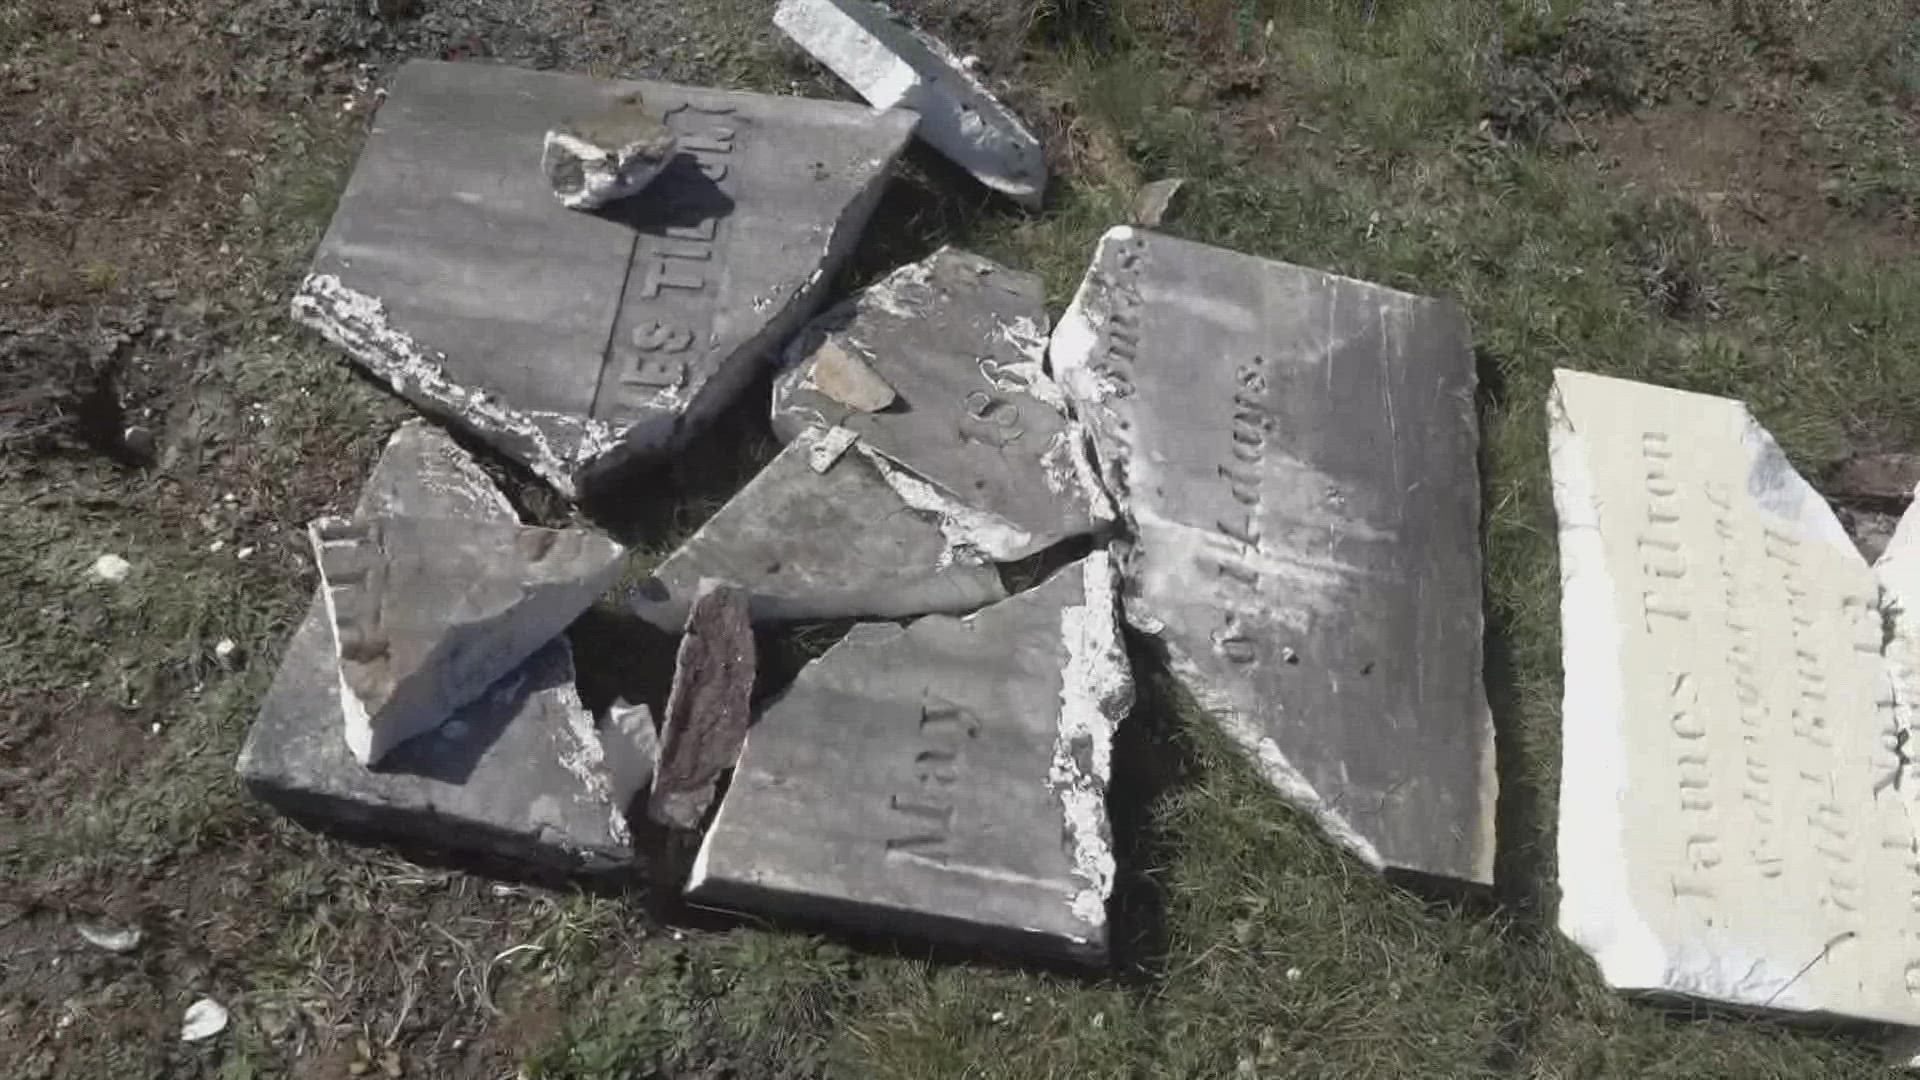 Several headstones were damaged or destroyed last month in a car accident, and town officials have been waiting for the insurance company to assess the damage.